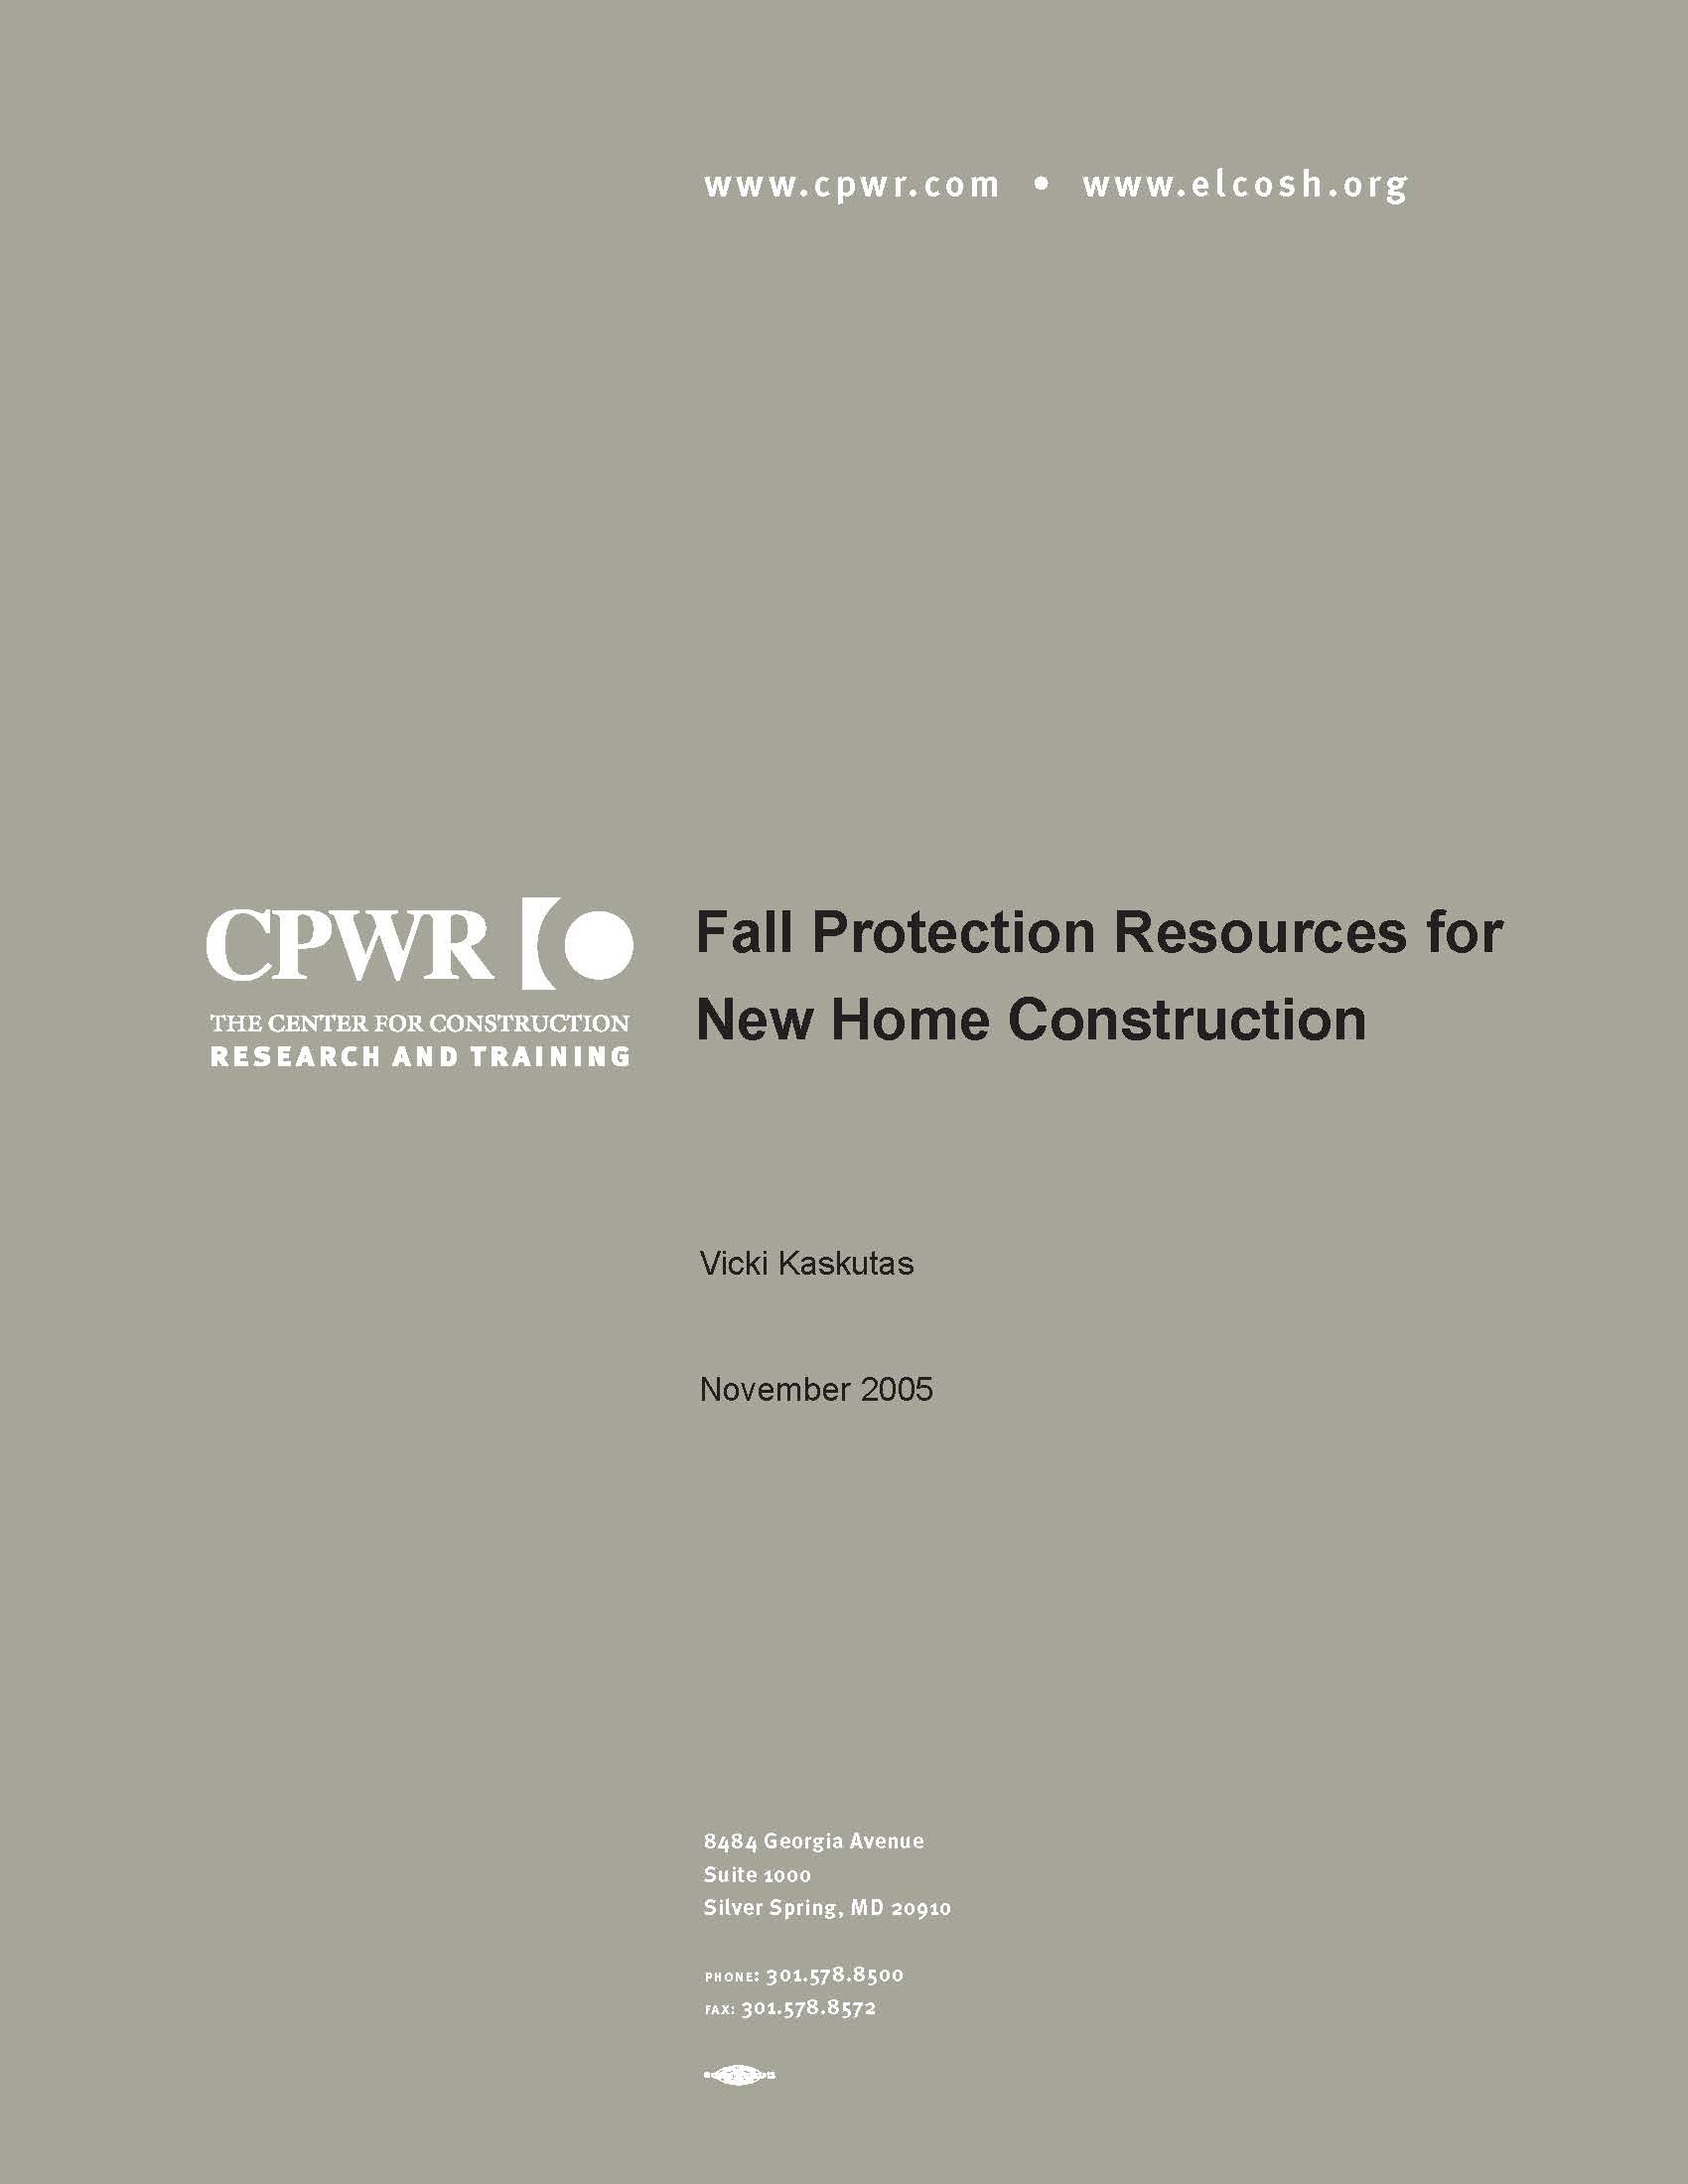 Fall Protection Resources cover